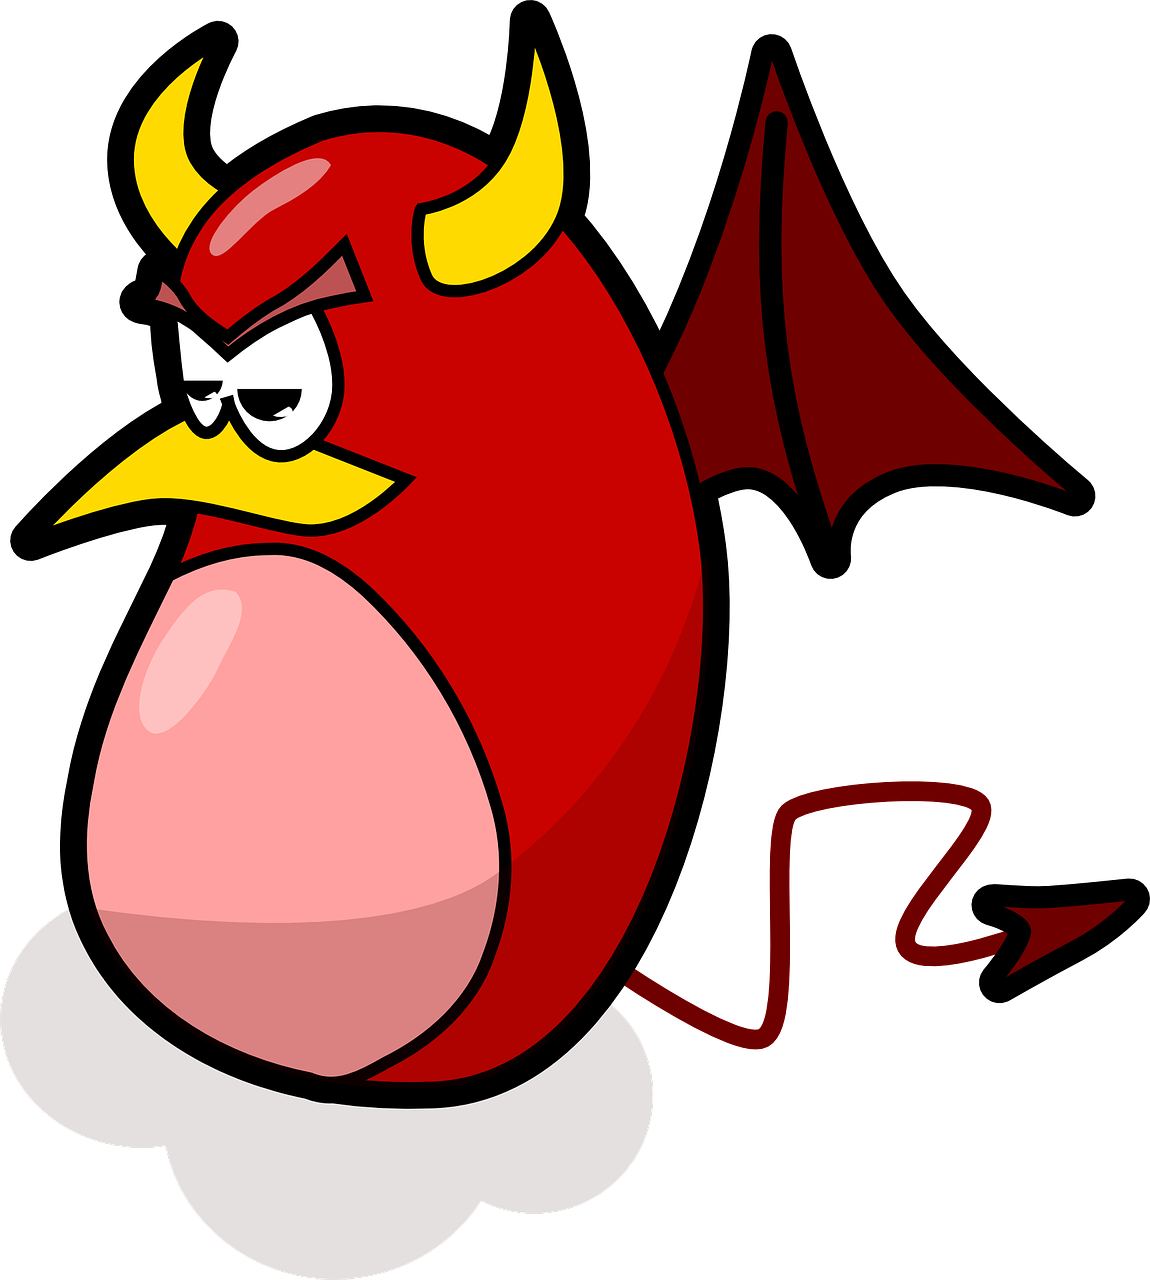 a red angry bird with horns and wings, vector art, inspired by Heinz Anger, pixabay, mingei, fat dragon with rider, scary vampire, hurricane, hot